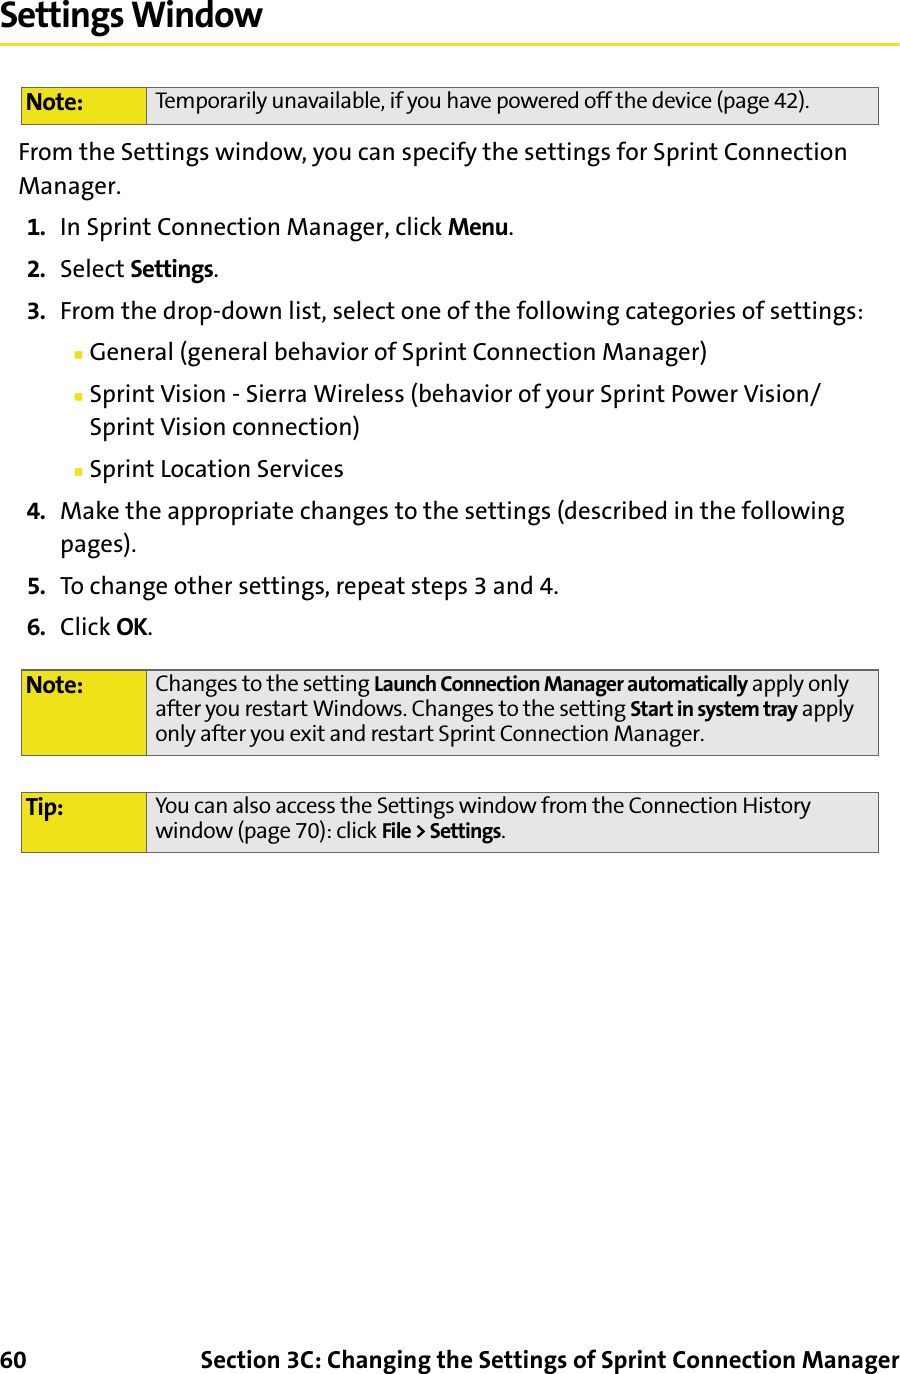 60 Section 3C: Changing the Settings of Sprint Connection ManagerSettings WindowFrom the Settings window, you can specify the settings for Sprint Connection Manager.1. In Sprint Connection Manager, click Menu.2. Select Settings.3. From the drop-down list, select one of the following categories of settings:䡲General (general behavior of Sprint Connection Manager)䡲Sprint Vision - Sierra Wireless (behavior of your Sprint Power Vision/Sprint Vision connection)䡲Sprint Location Services4. Make the appropriate changes to the settings (described in the following pages).5. To change other settings, repeat steps 3 and 4.6. Click OK.Note: Temporarily unavailable, if you have powered off the device (page 42).Note: Changes to the setting Launch Connection Manager automatically apply only after you restart Windows. Changes to the setting Start in system tray apply only after you exit and restart Sprint Connection Manager.Tip: You can also access the Settings window from the Connection History window (page 70): click File &gt; Settings.